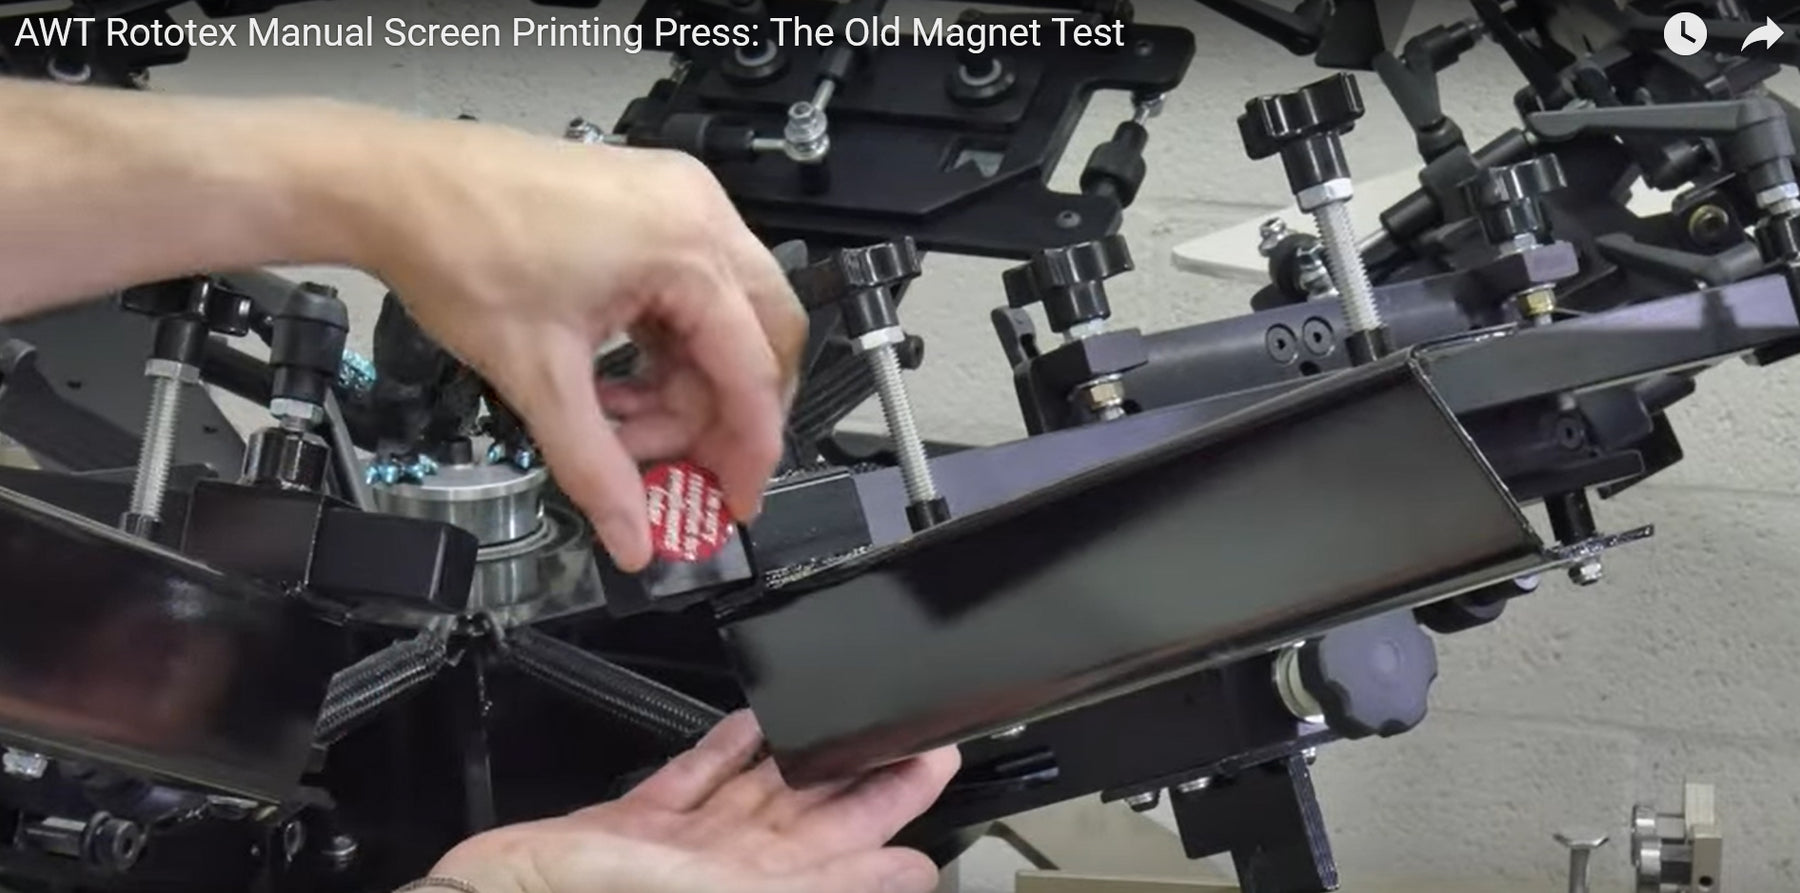 AWT Rototex Manual Screen Printing Press: The Old Magnet Test